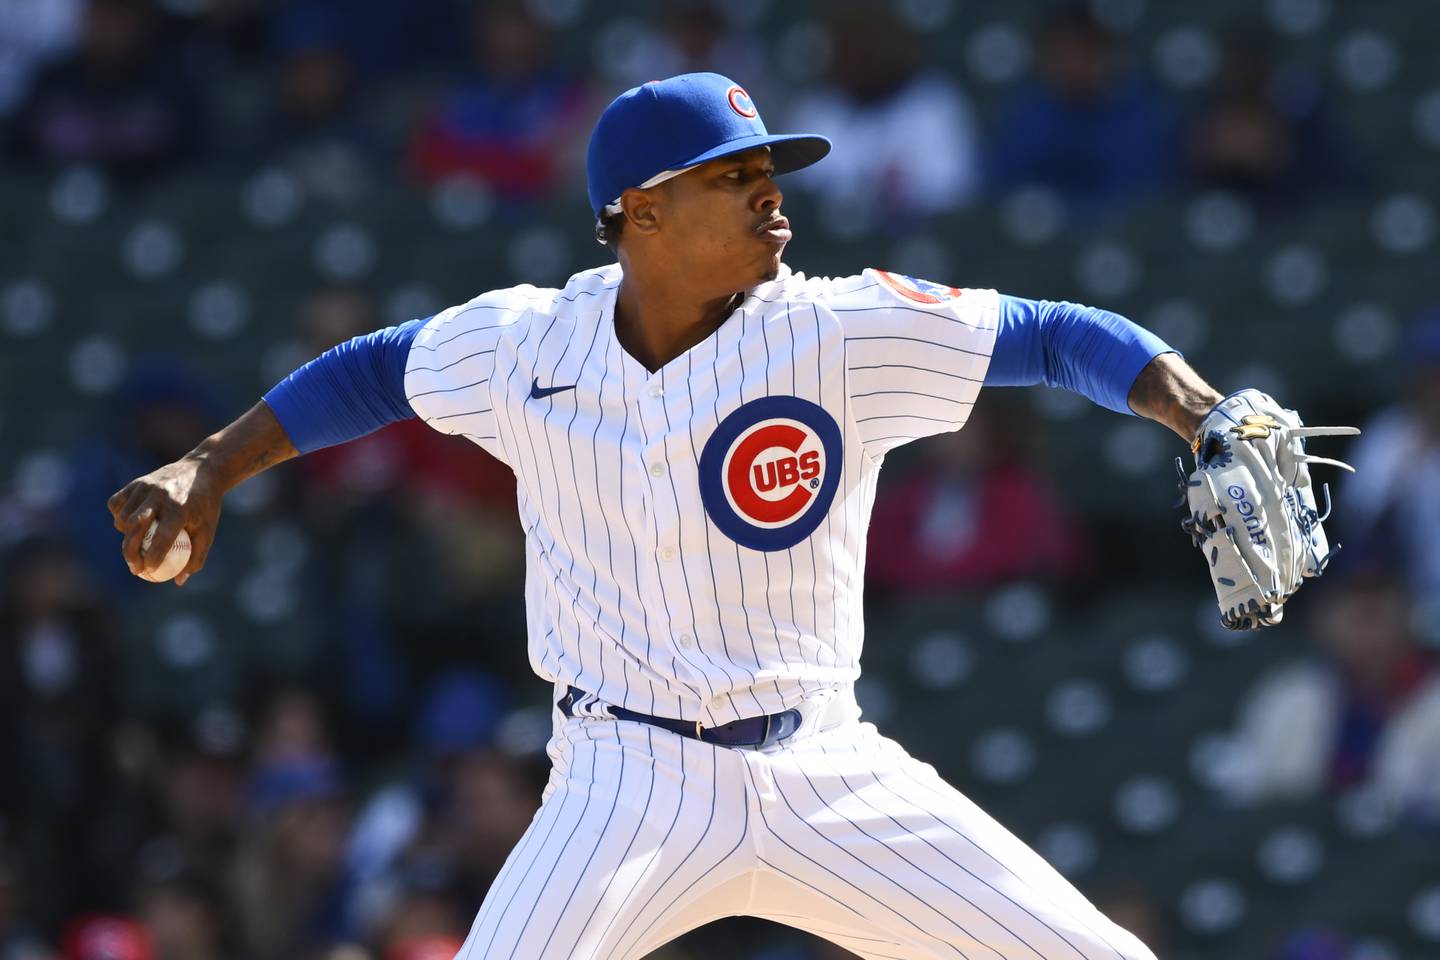 Cubs starter Marcus Stroman pitches in the first inning Sunday, Oct. 2, 2022, at Wrigley Field.